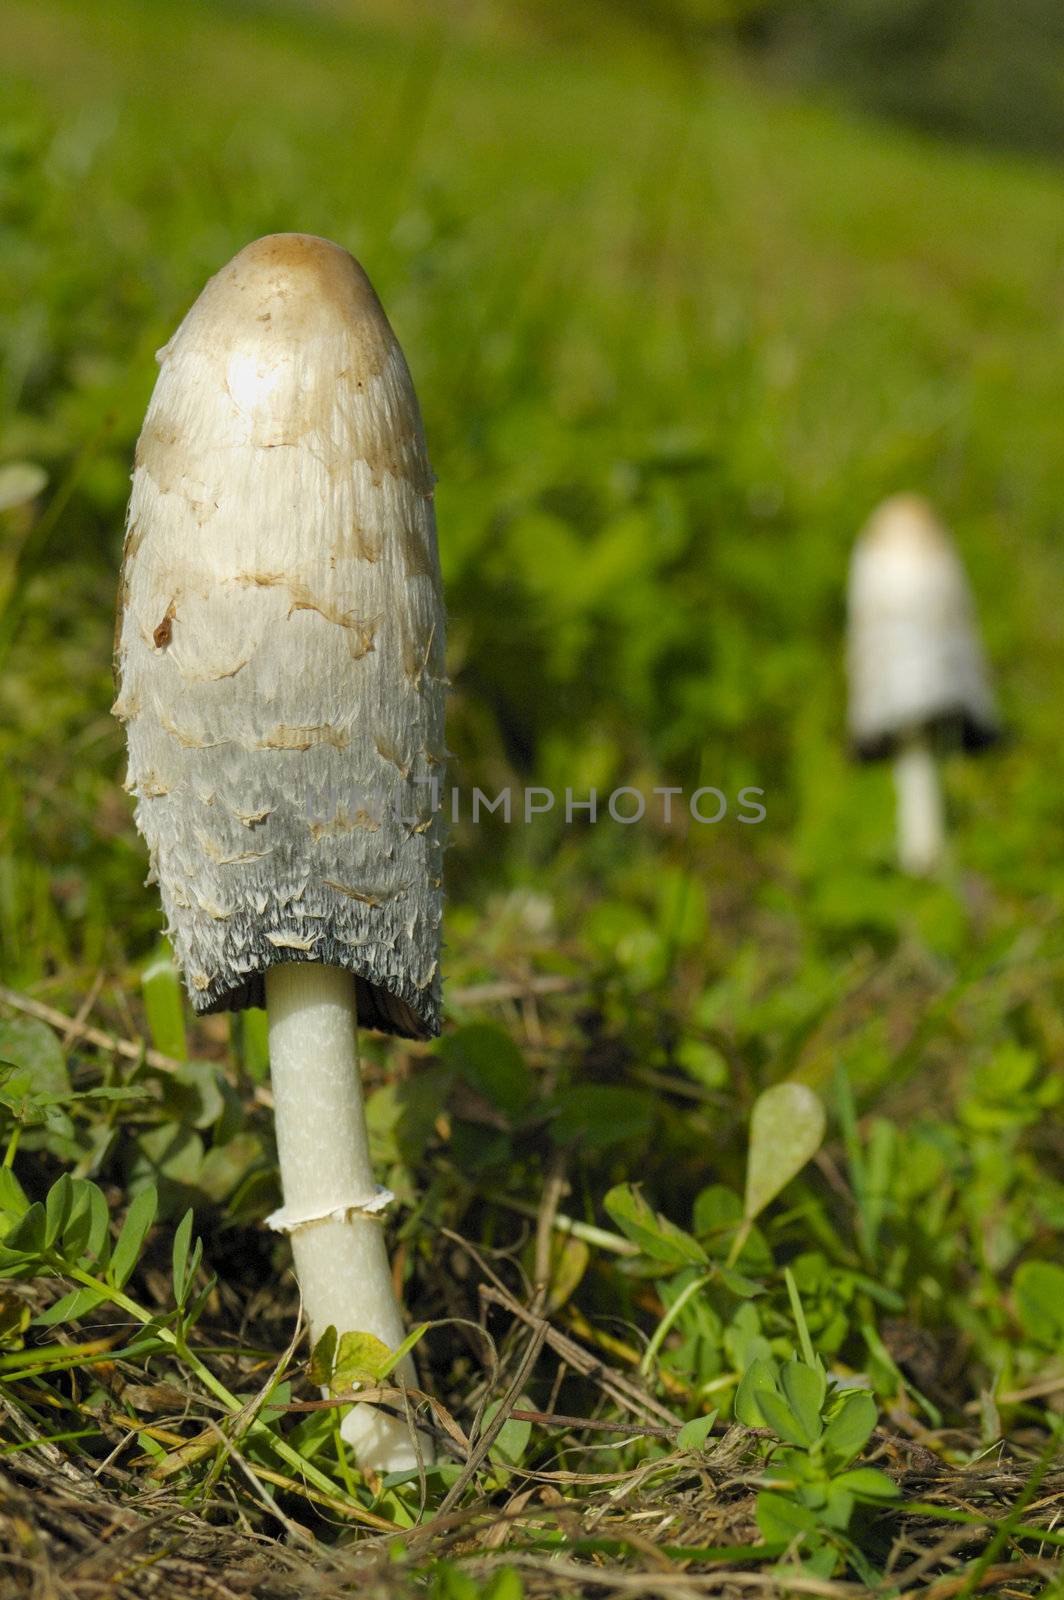 A fungus called 'Shaggy Ink Cap' (or Lawyer's Wig or Judge's Wig (Coprinus comatus). Space for text on the out-of-focus background. A second specimen can be seen, out of focus in the background.